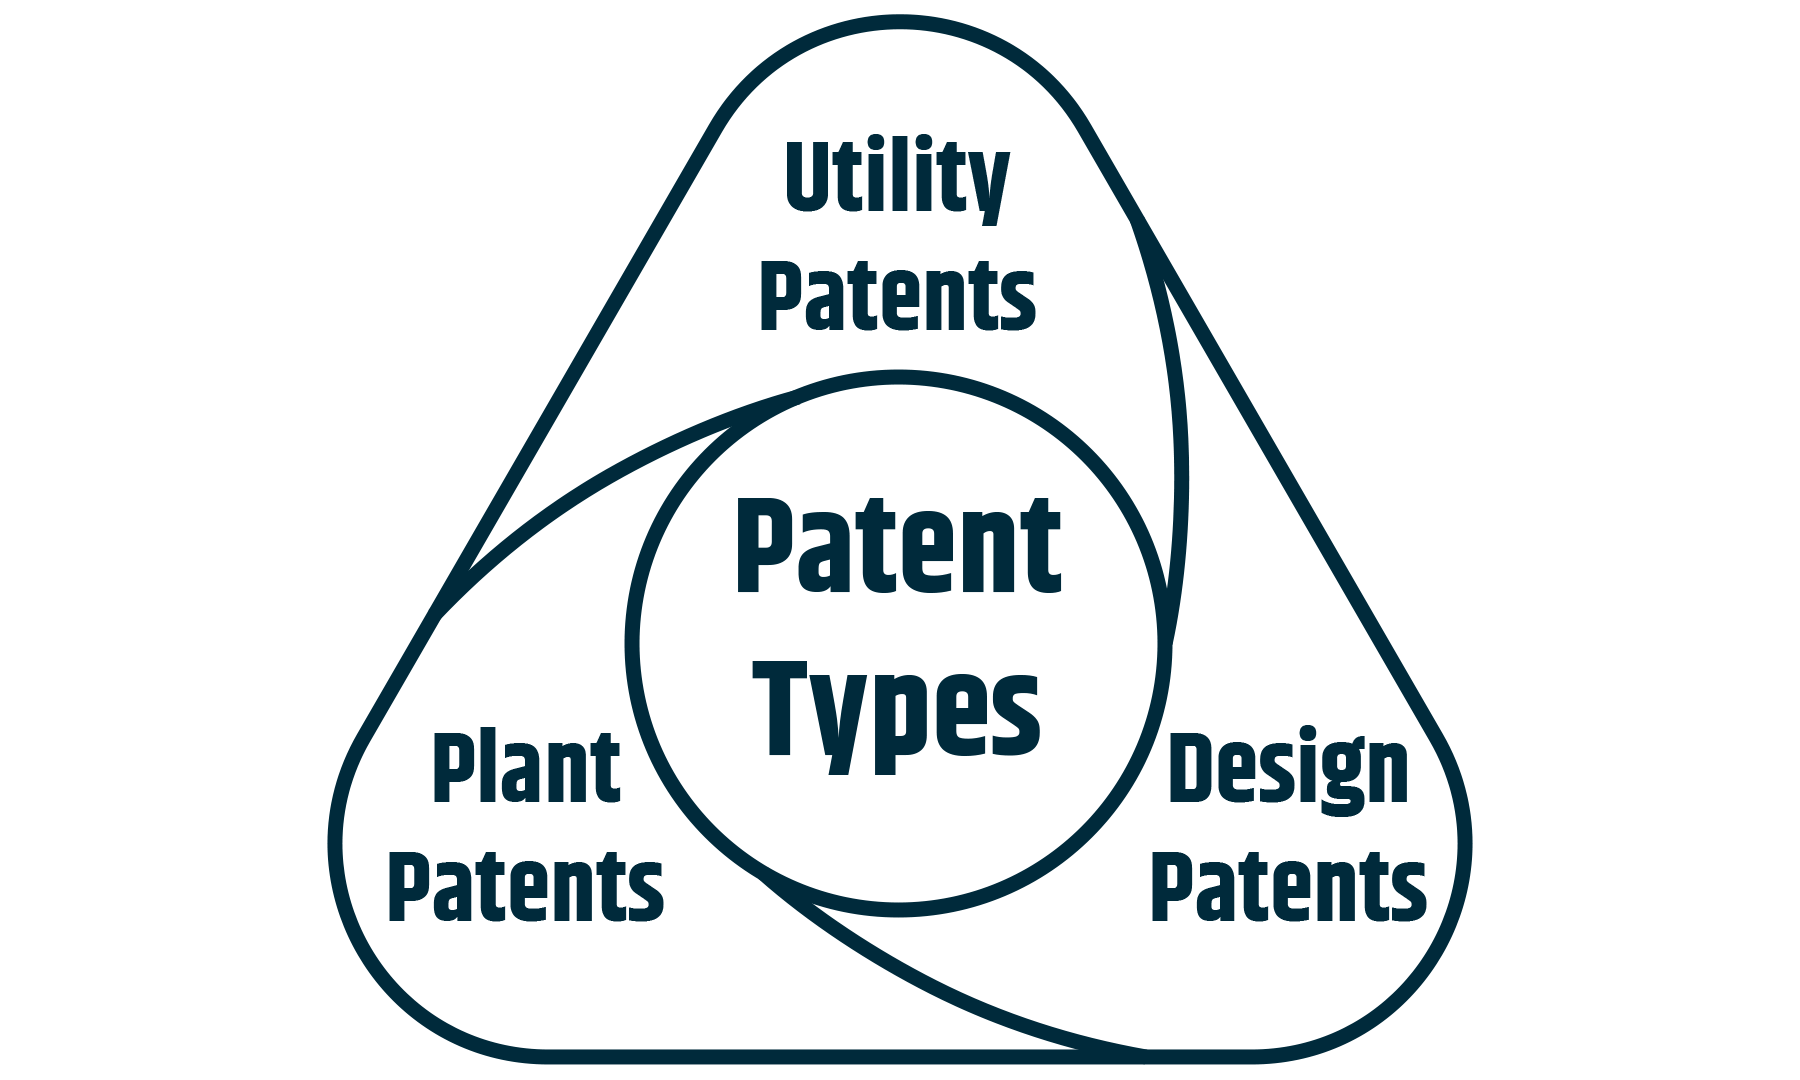 There are three types of patents in India. utility patents, Design patents, and Plant Patents